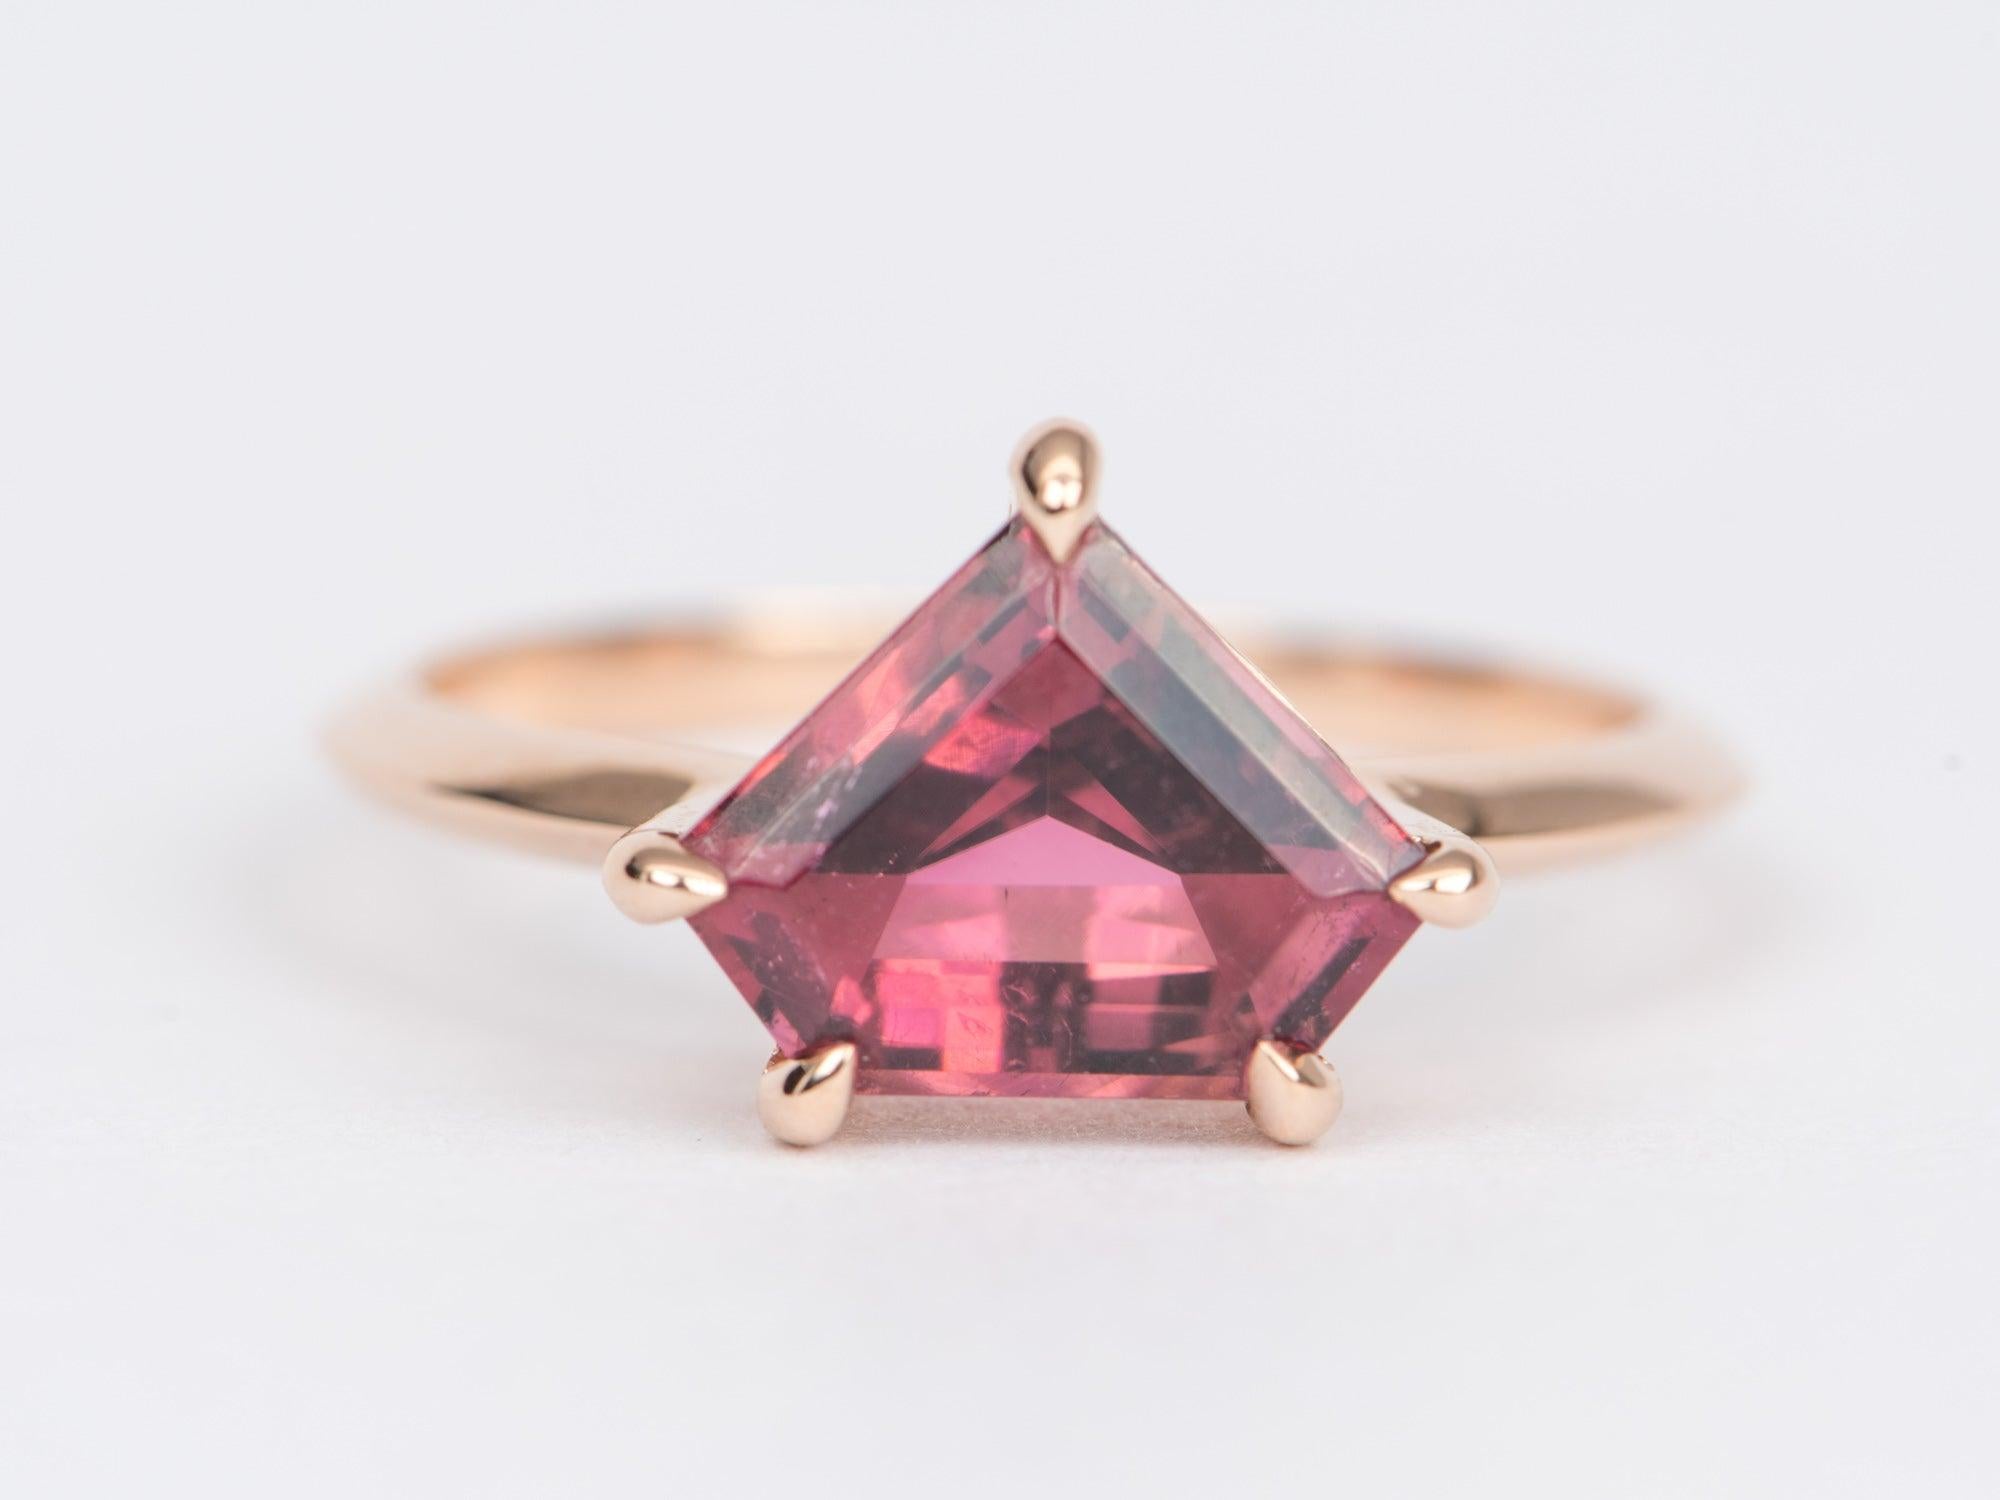 ♥ Solid 14k yellow gold ring set with a beautiful shield-shaped tourmaline
♥ Gorgeous pink red color!
♥ The item measures 9.8mm in length, 12.1mm in width, and stands 5.9mm from the finger

♥ US Size 7 (Free resizing up or down 1 size)
♥ Band width: